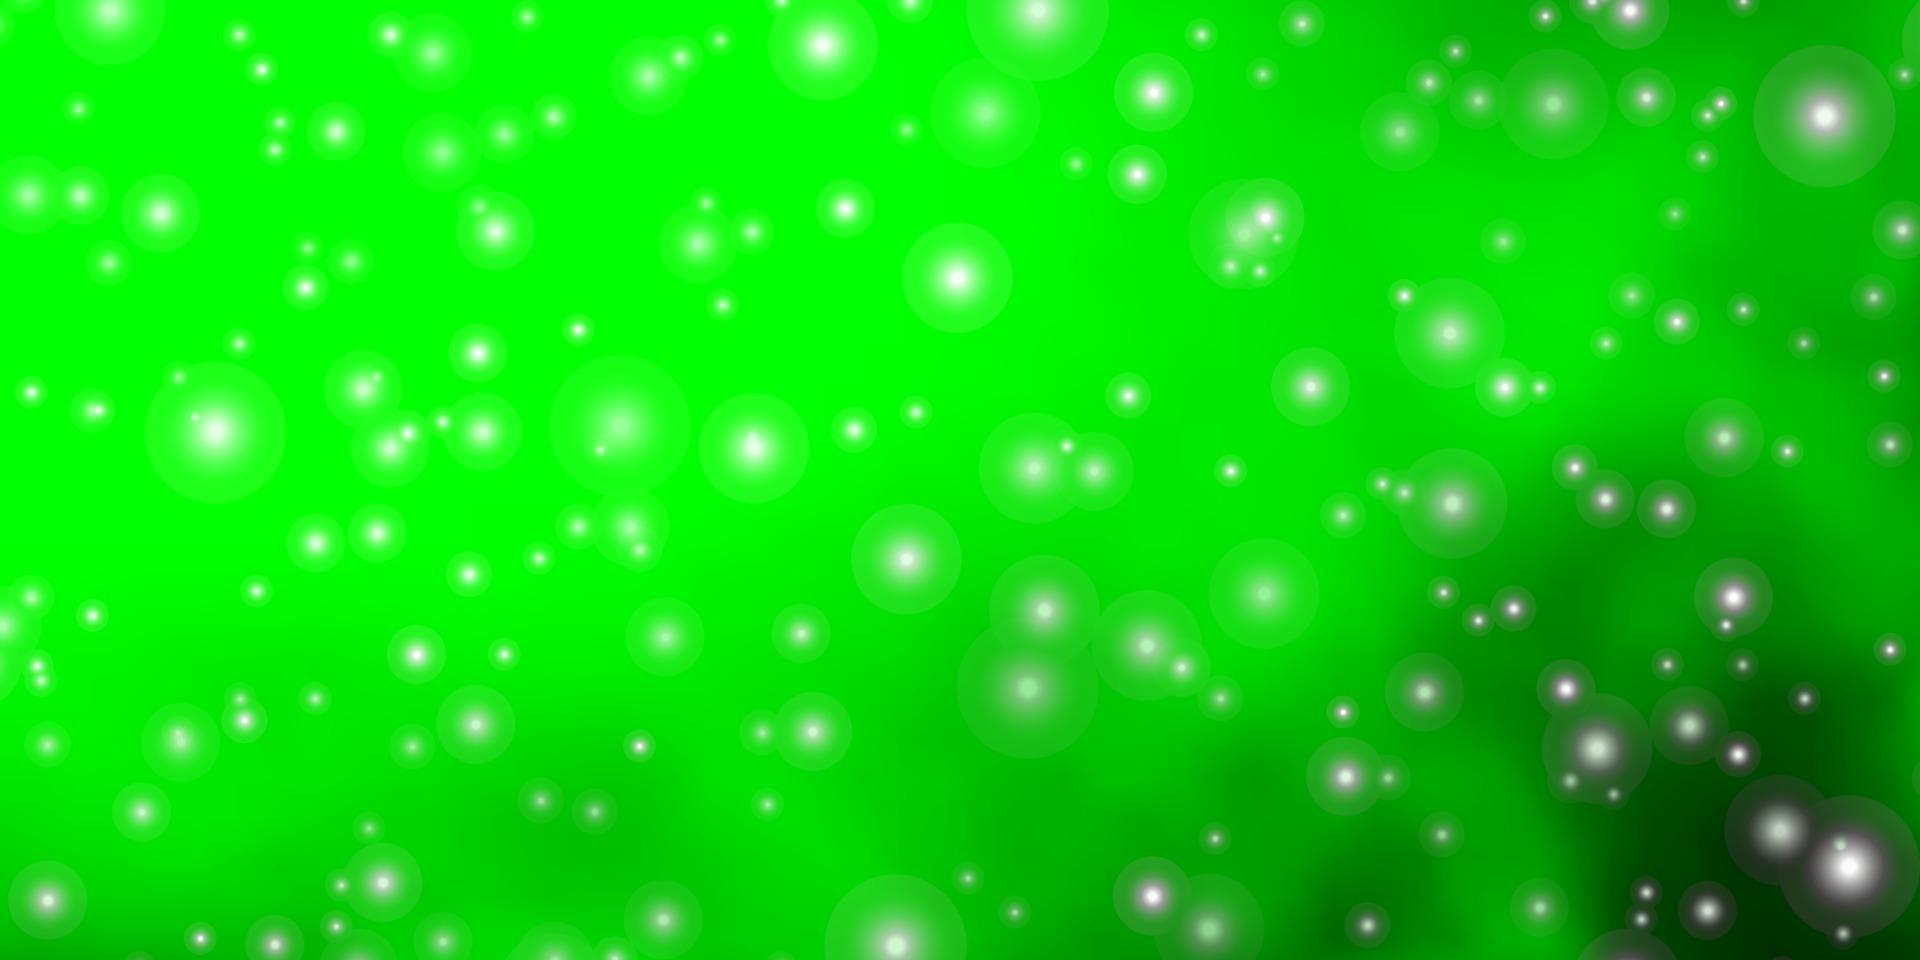 Light Green vector background with colorful stars.